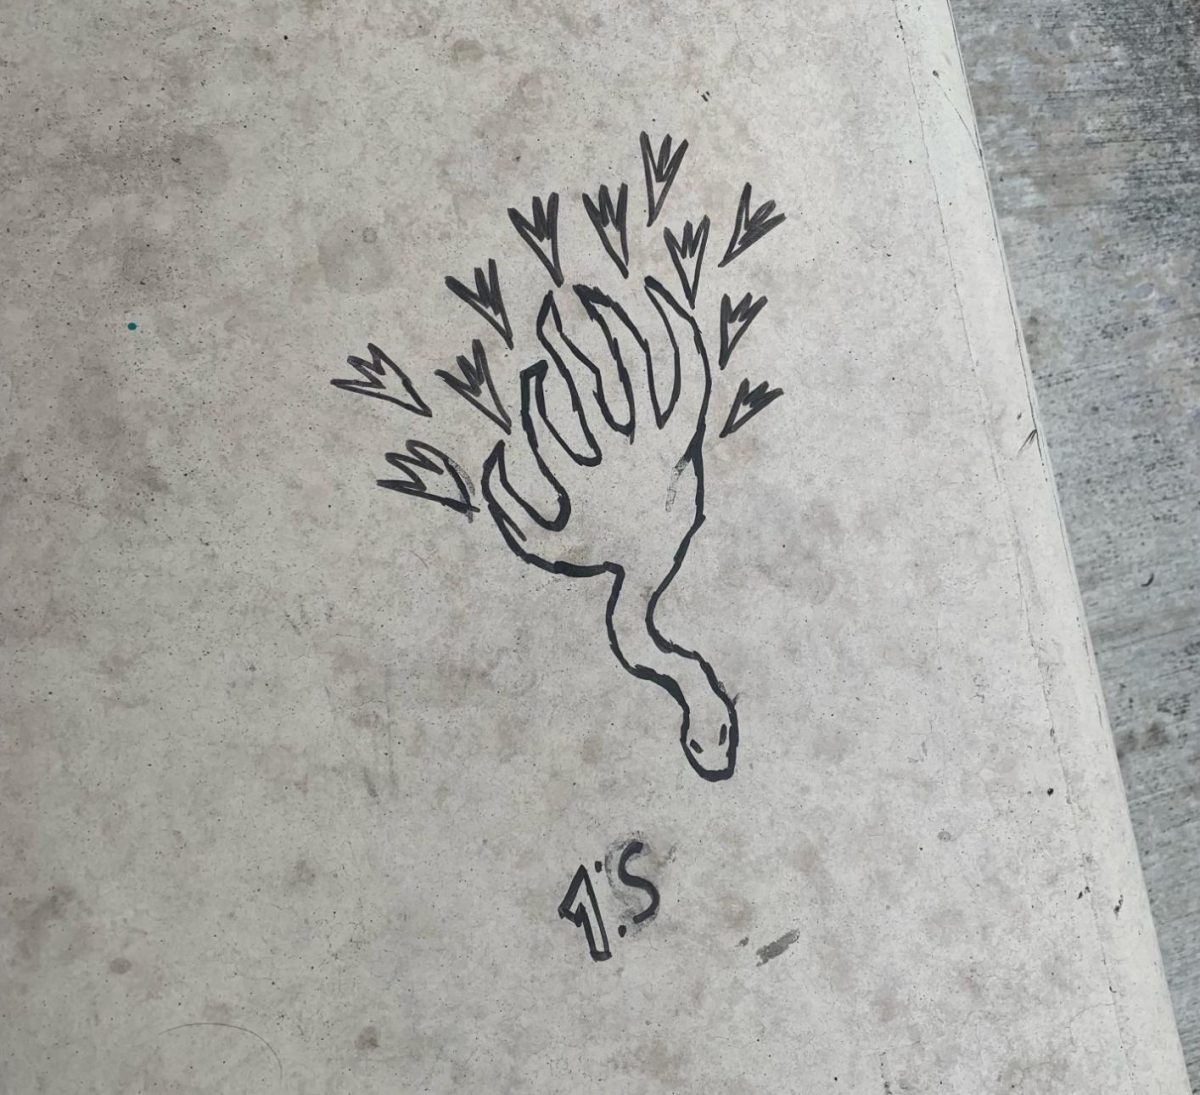 Graffiti found around campus, this one being at the Fireplace Pavilion. 